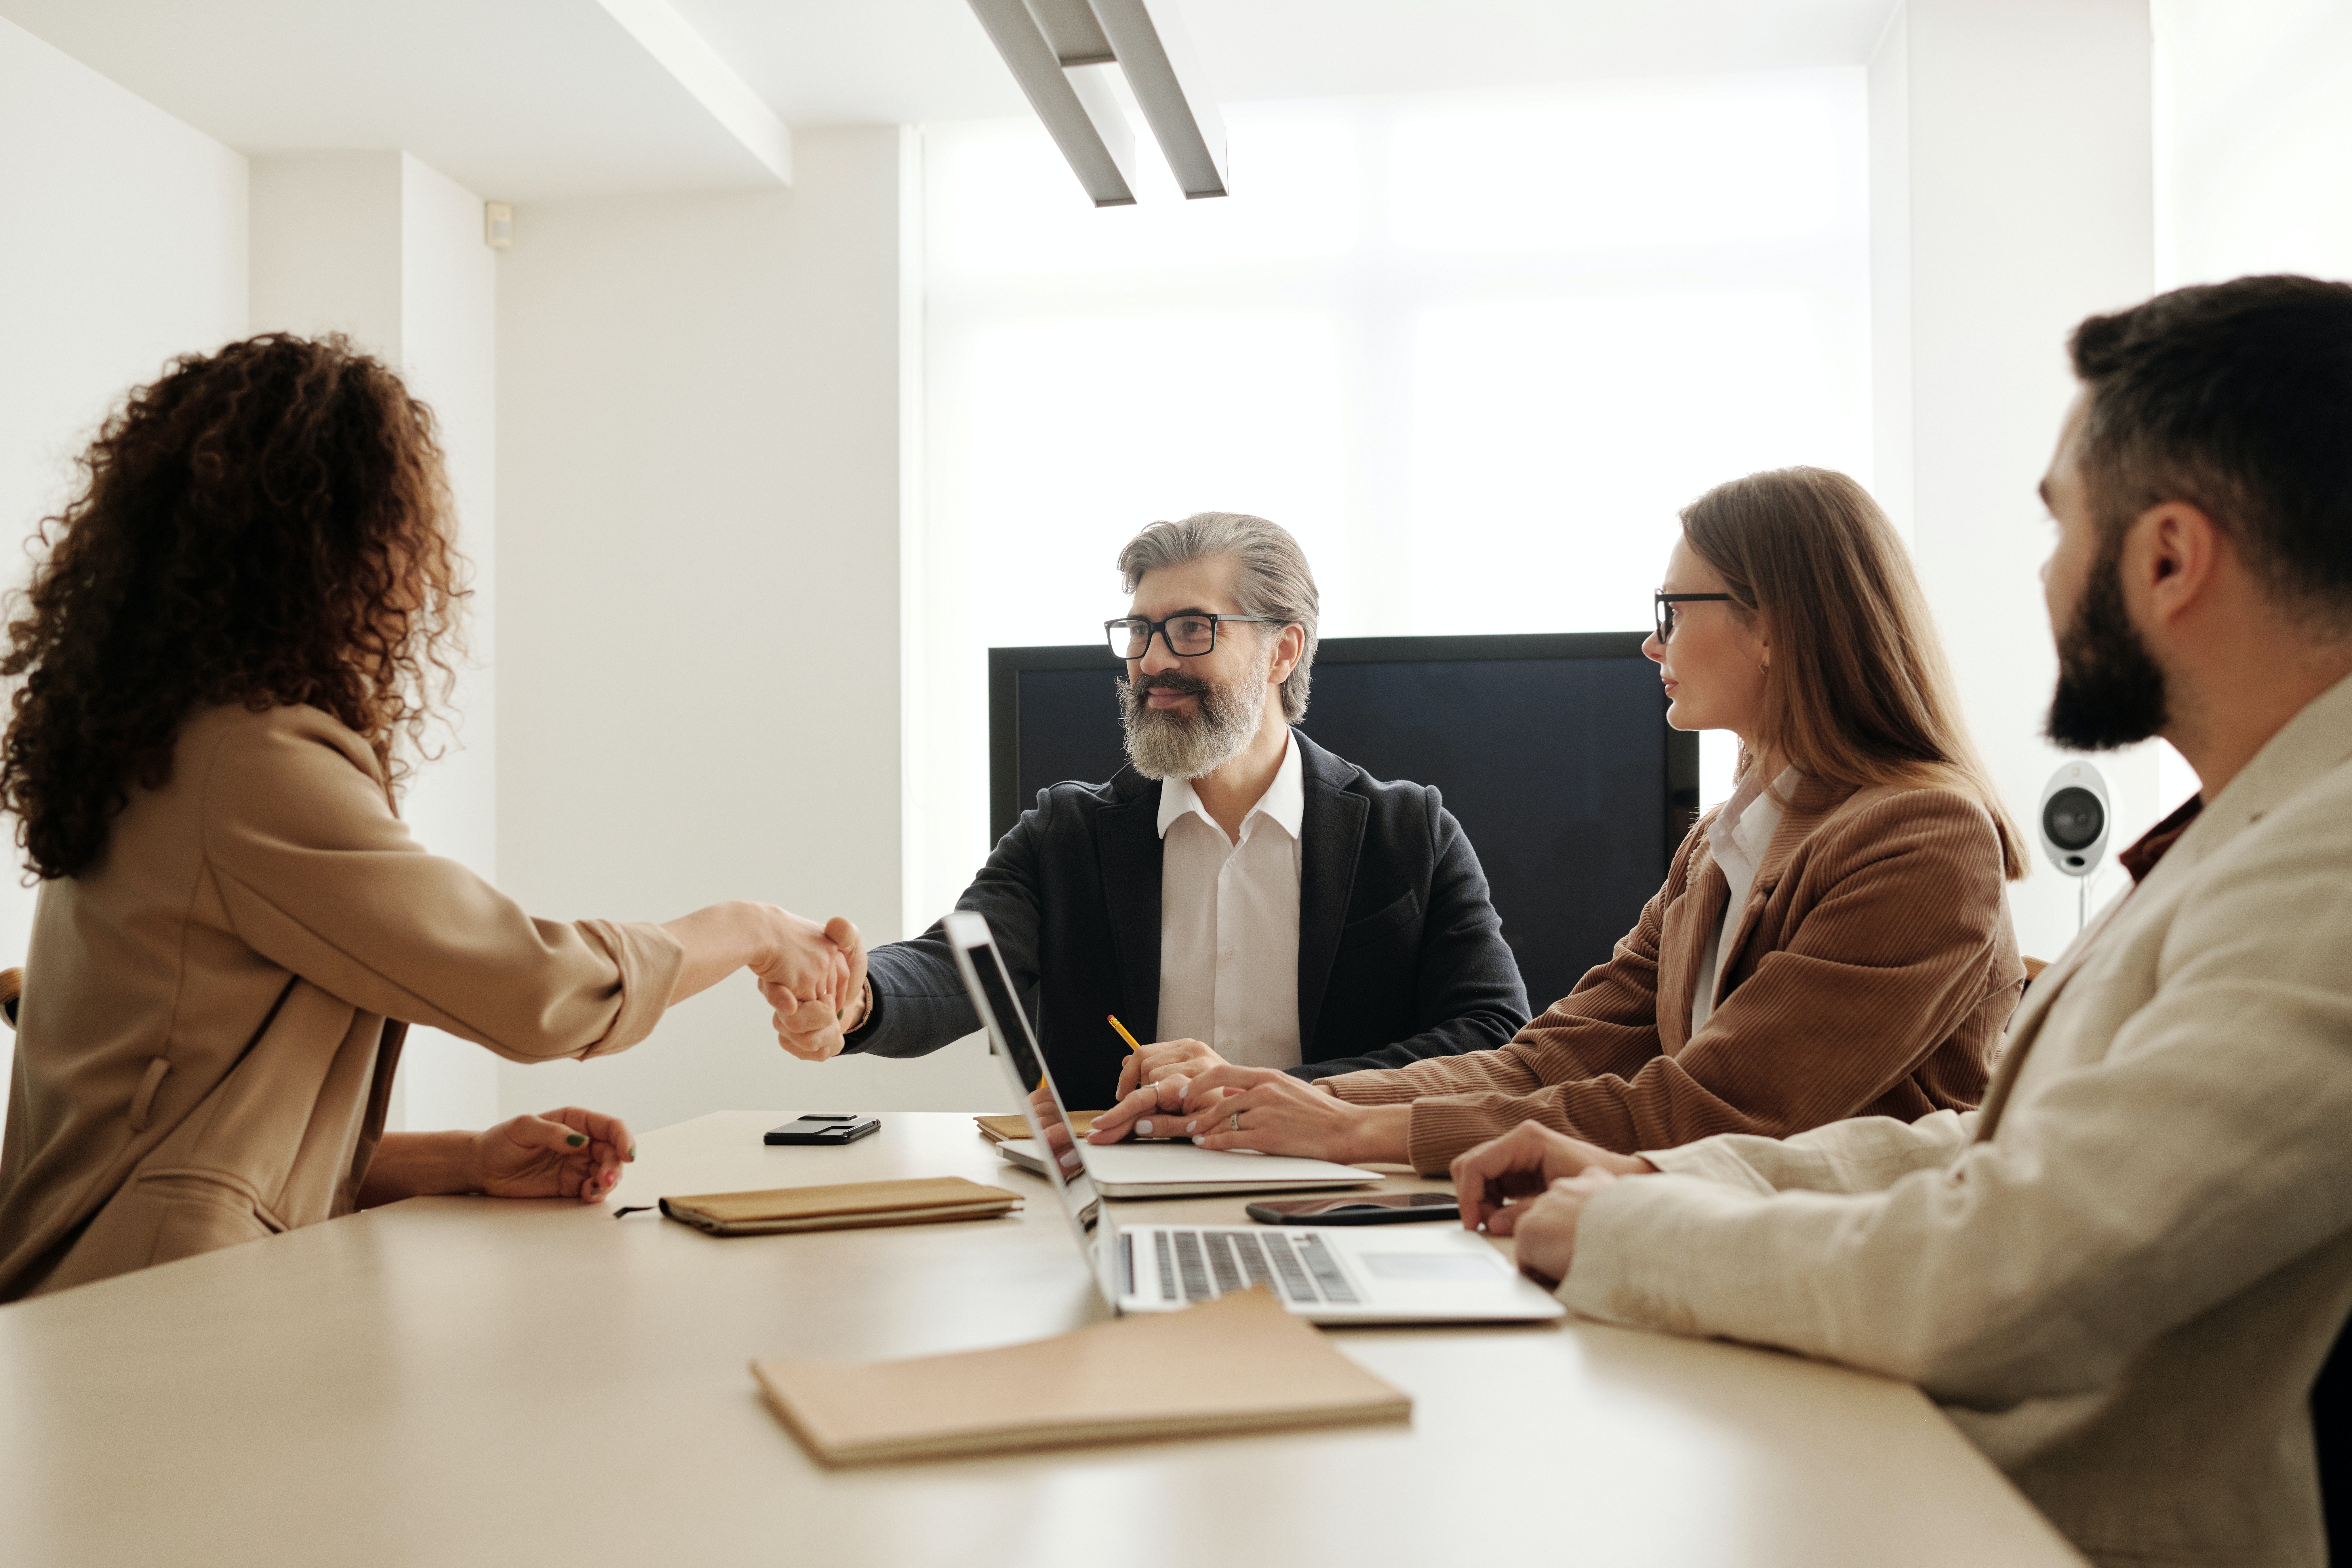 A picture of two professionals shaking hands at a conference table as this article is about Partner Relationship Management aka PRM software, where vendors can optimize their channel partner programs by automating common industry process for sales, marketing, and enablement.